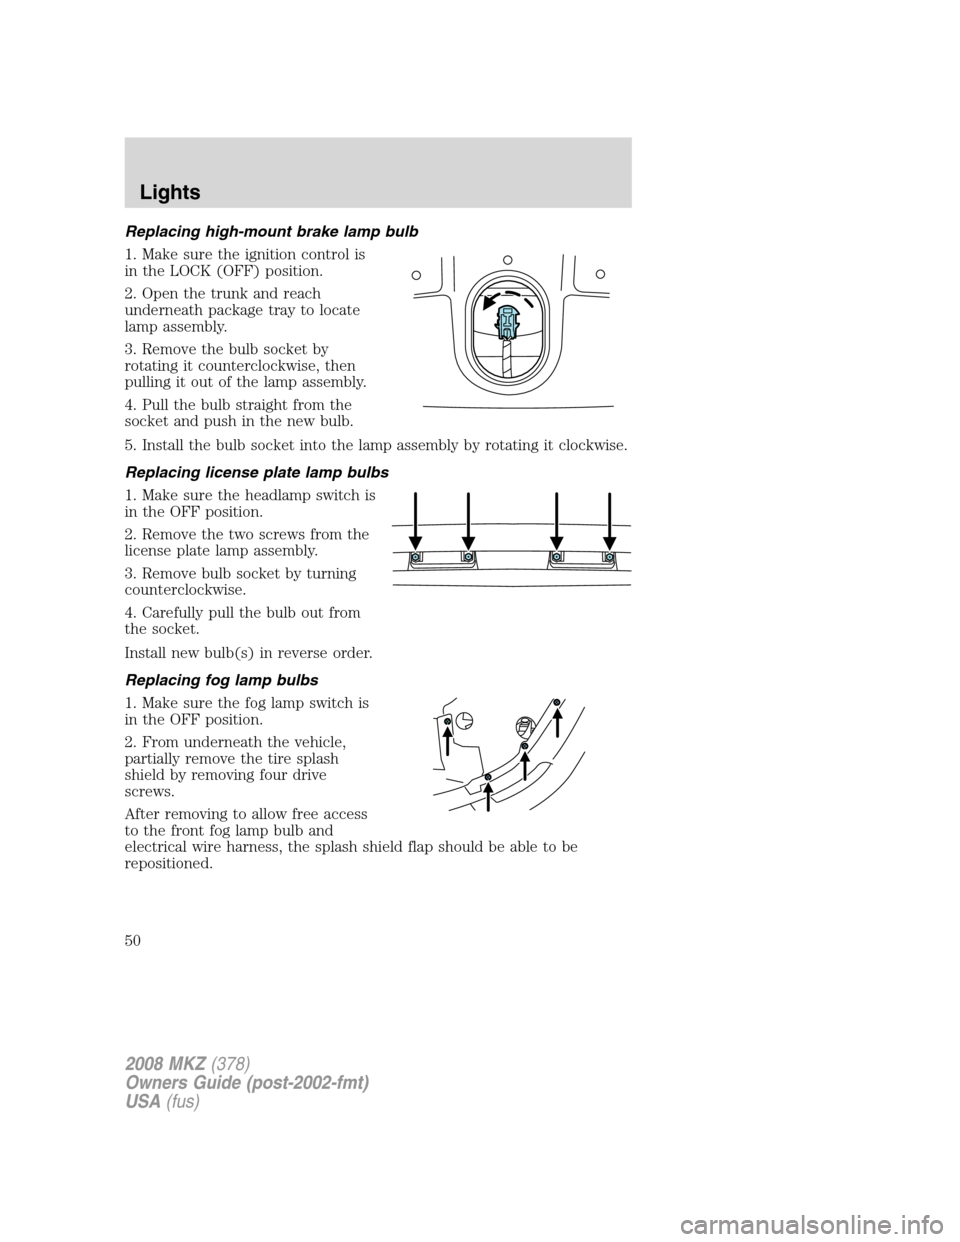 LINCOLN MKZ 2008 User Guide Replacing high-mount brake lamp bulb
1. Make sure the ignition control is
in the LOCK (OFF) position.
2. Open the trunk and reach
underneath package tray to locate
lamp assembly.
3. Remove the bulb so